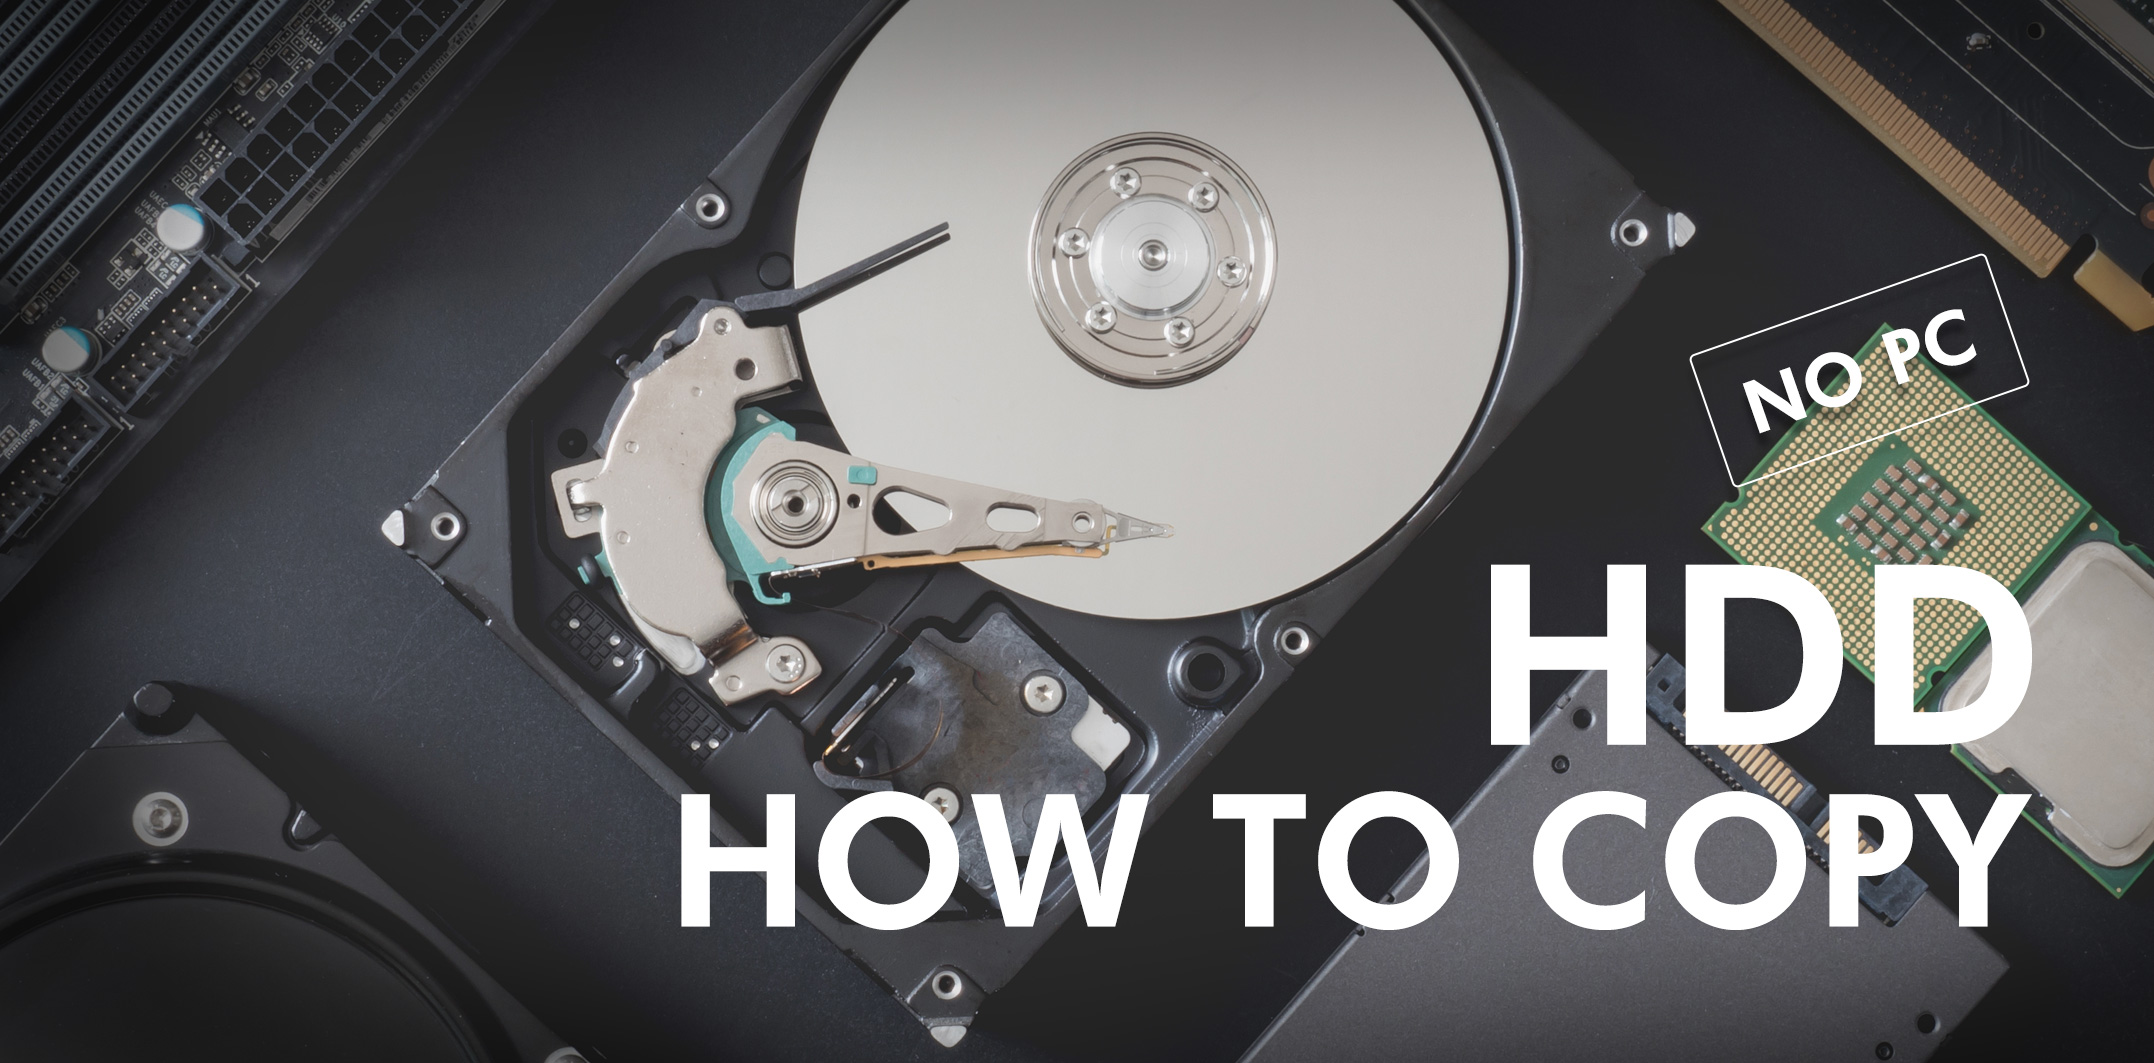 how to copy hdd